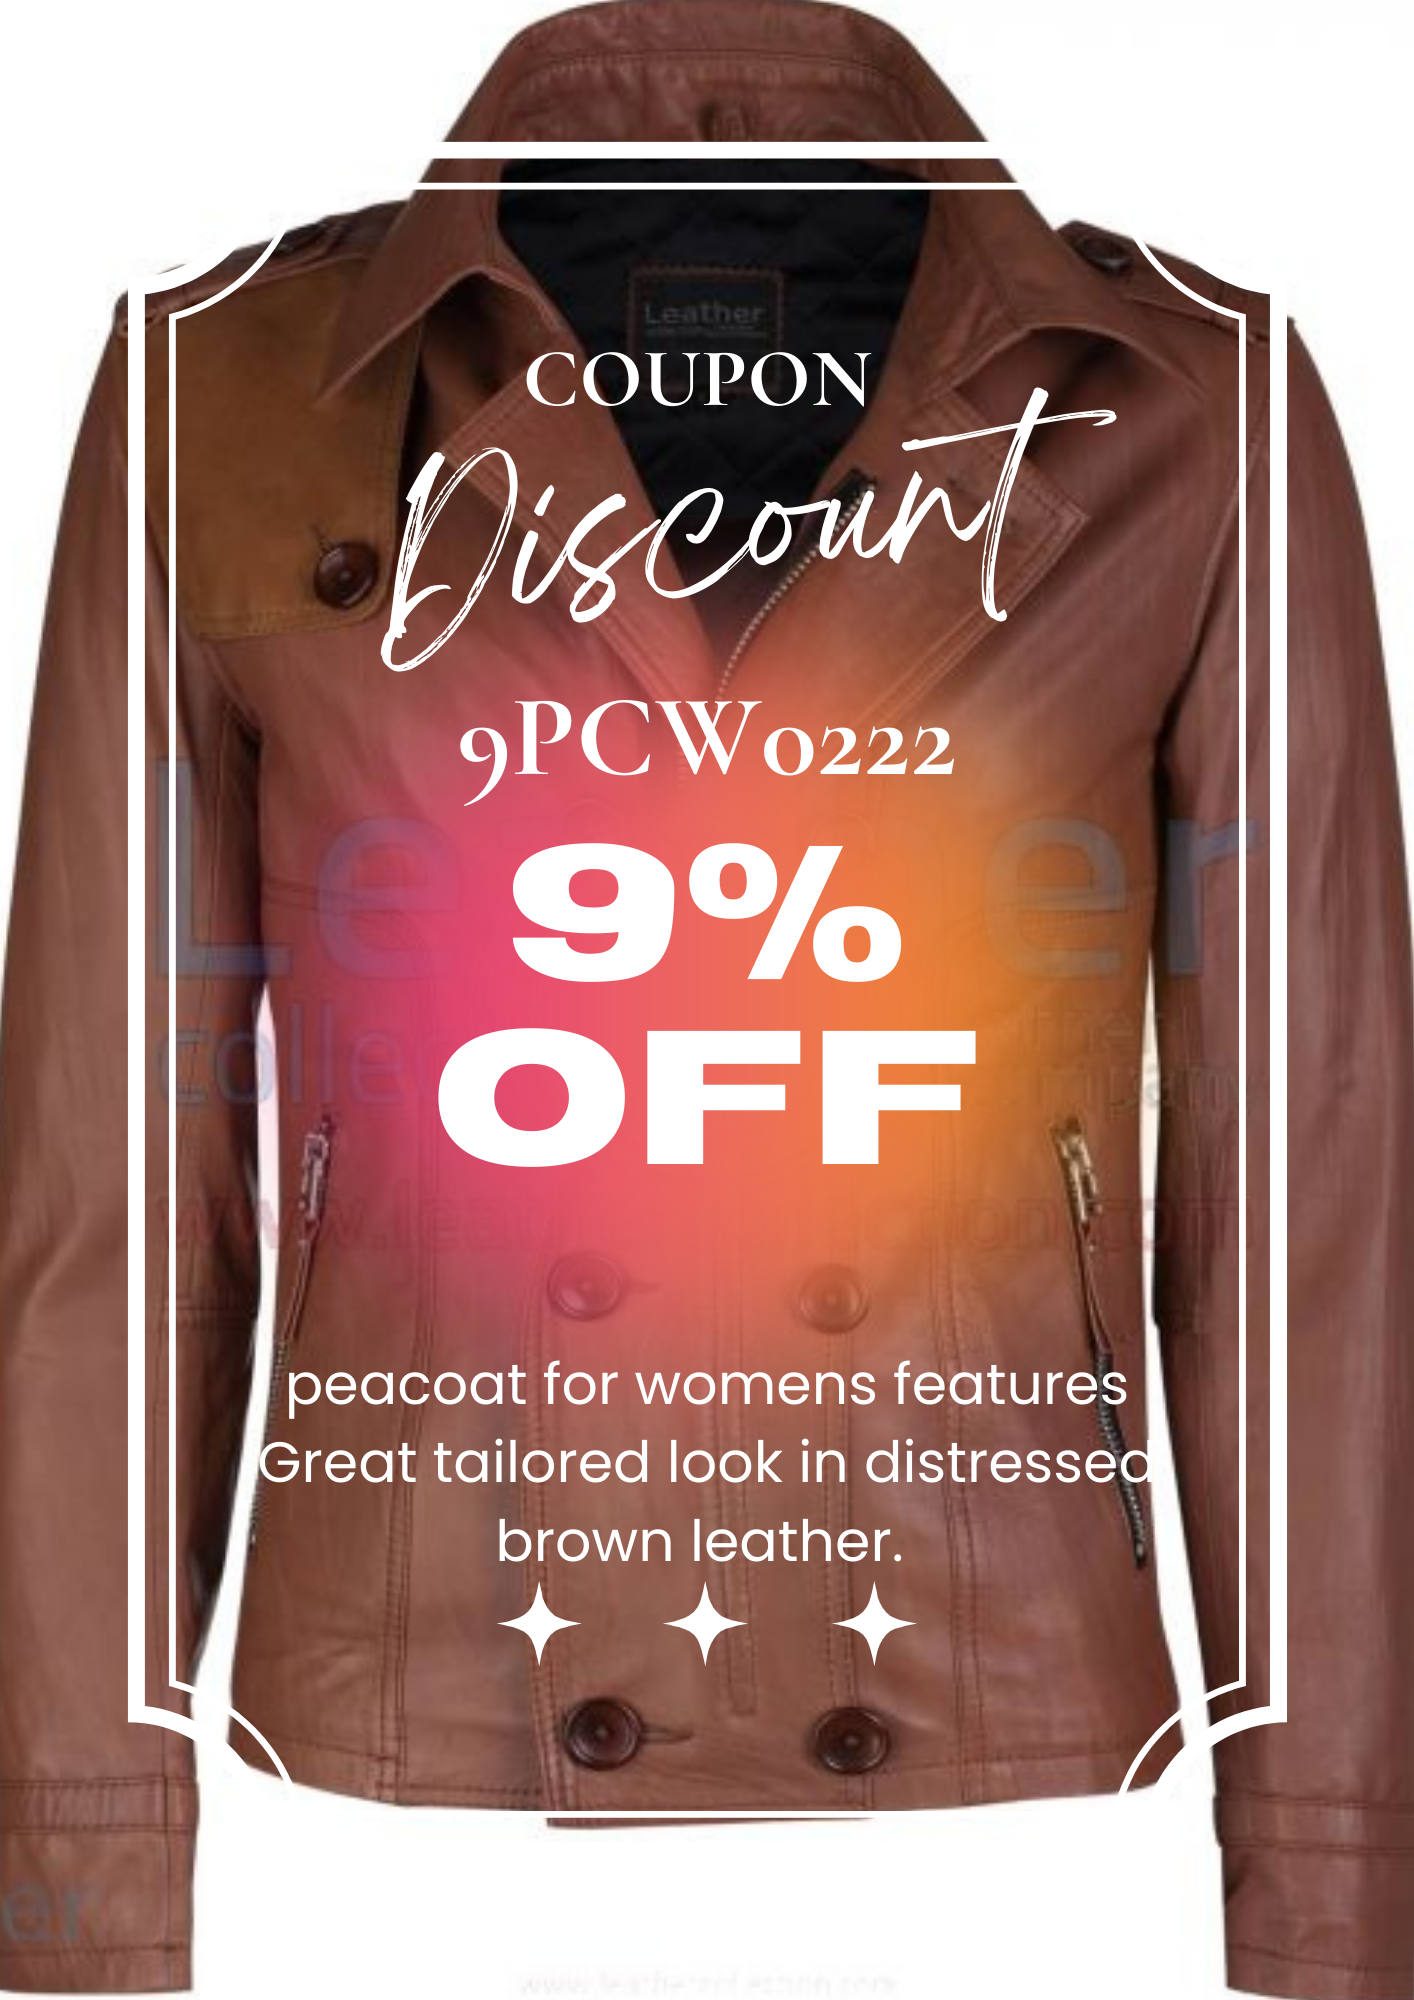 Leather peacoat for womens